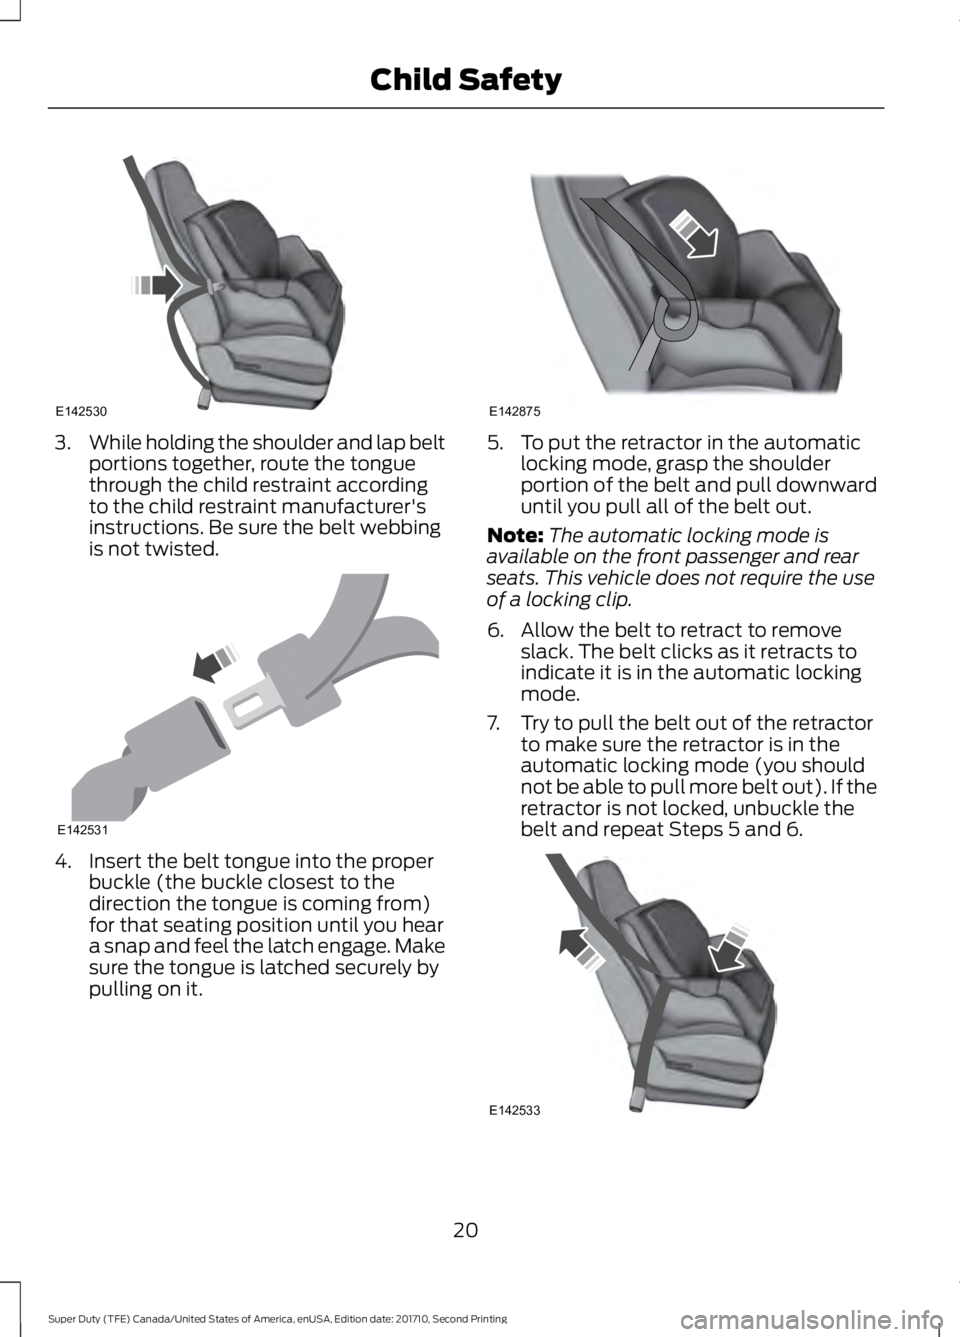 FORD F250 SUPER DUTY 2017  Owners Manual 3.While holding the shoulder and lap beltportions together, route the tonguethrough the child restraint accordingto the child restraint manufacturer'sinstructions. Be sure the belt webbingis not t